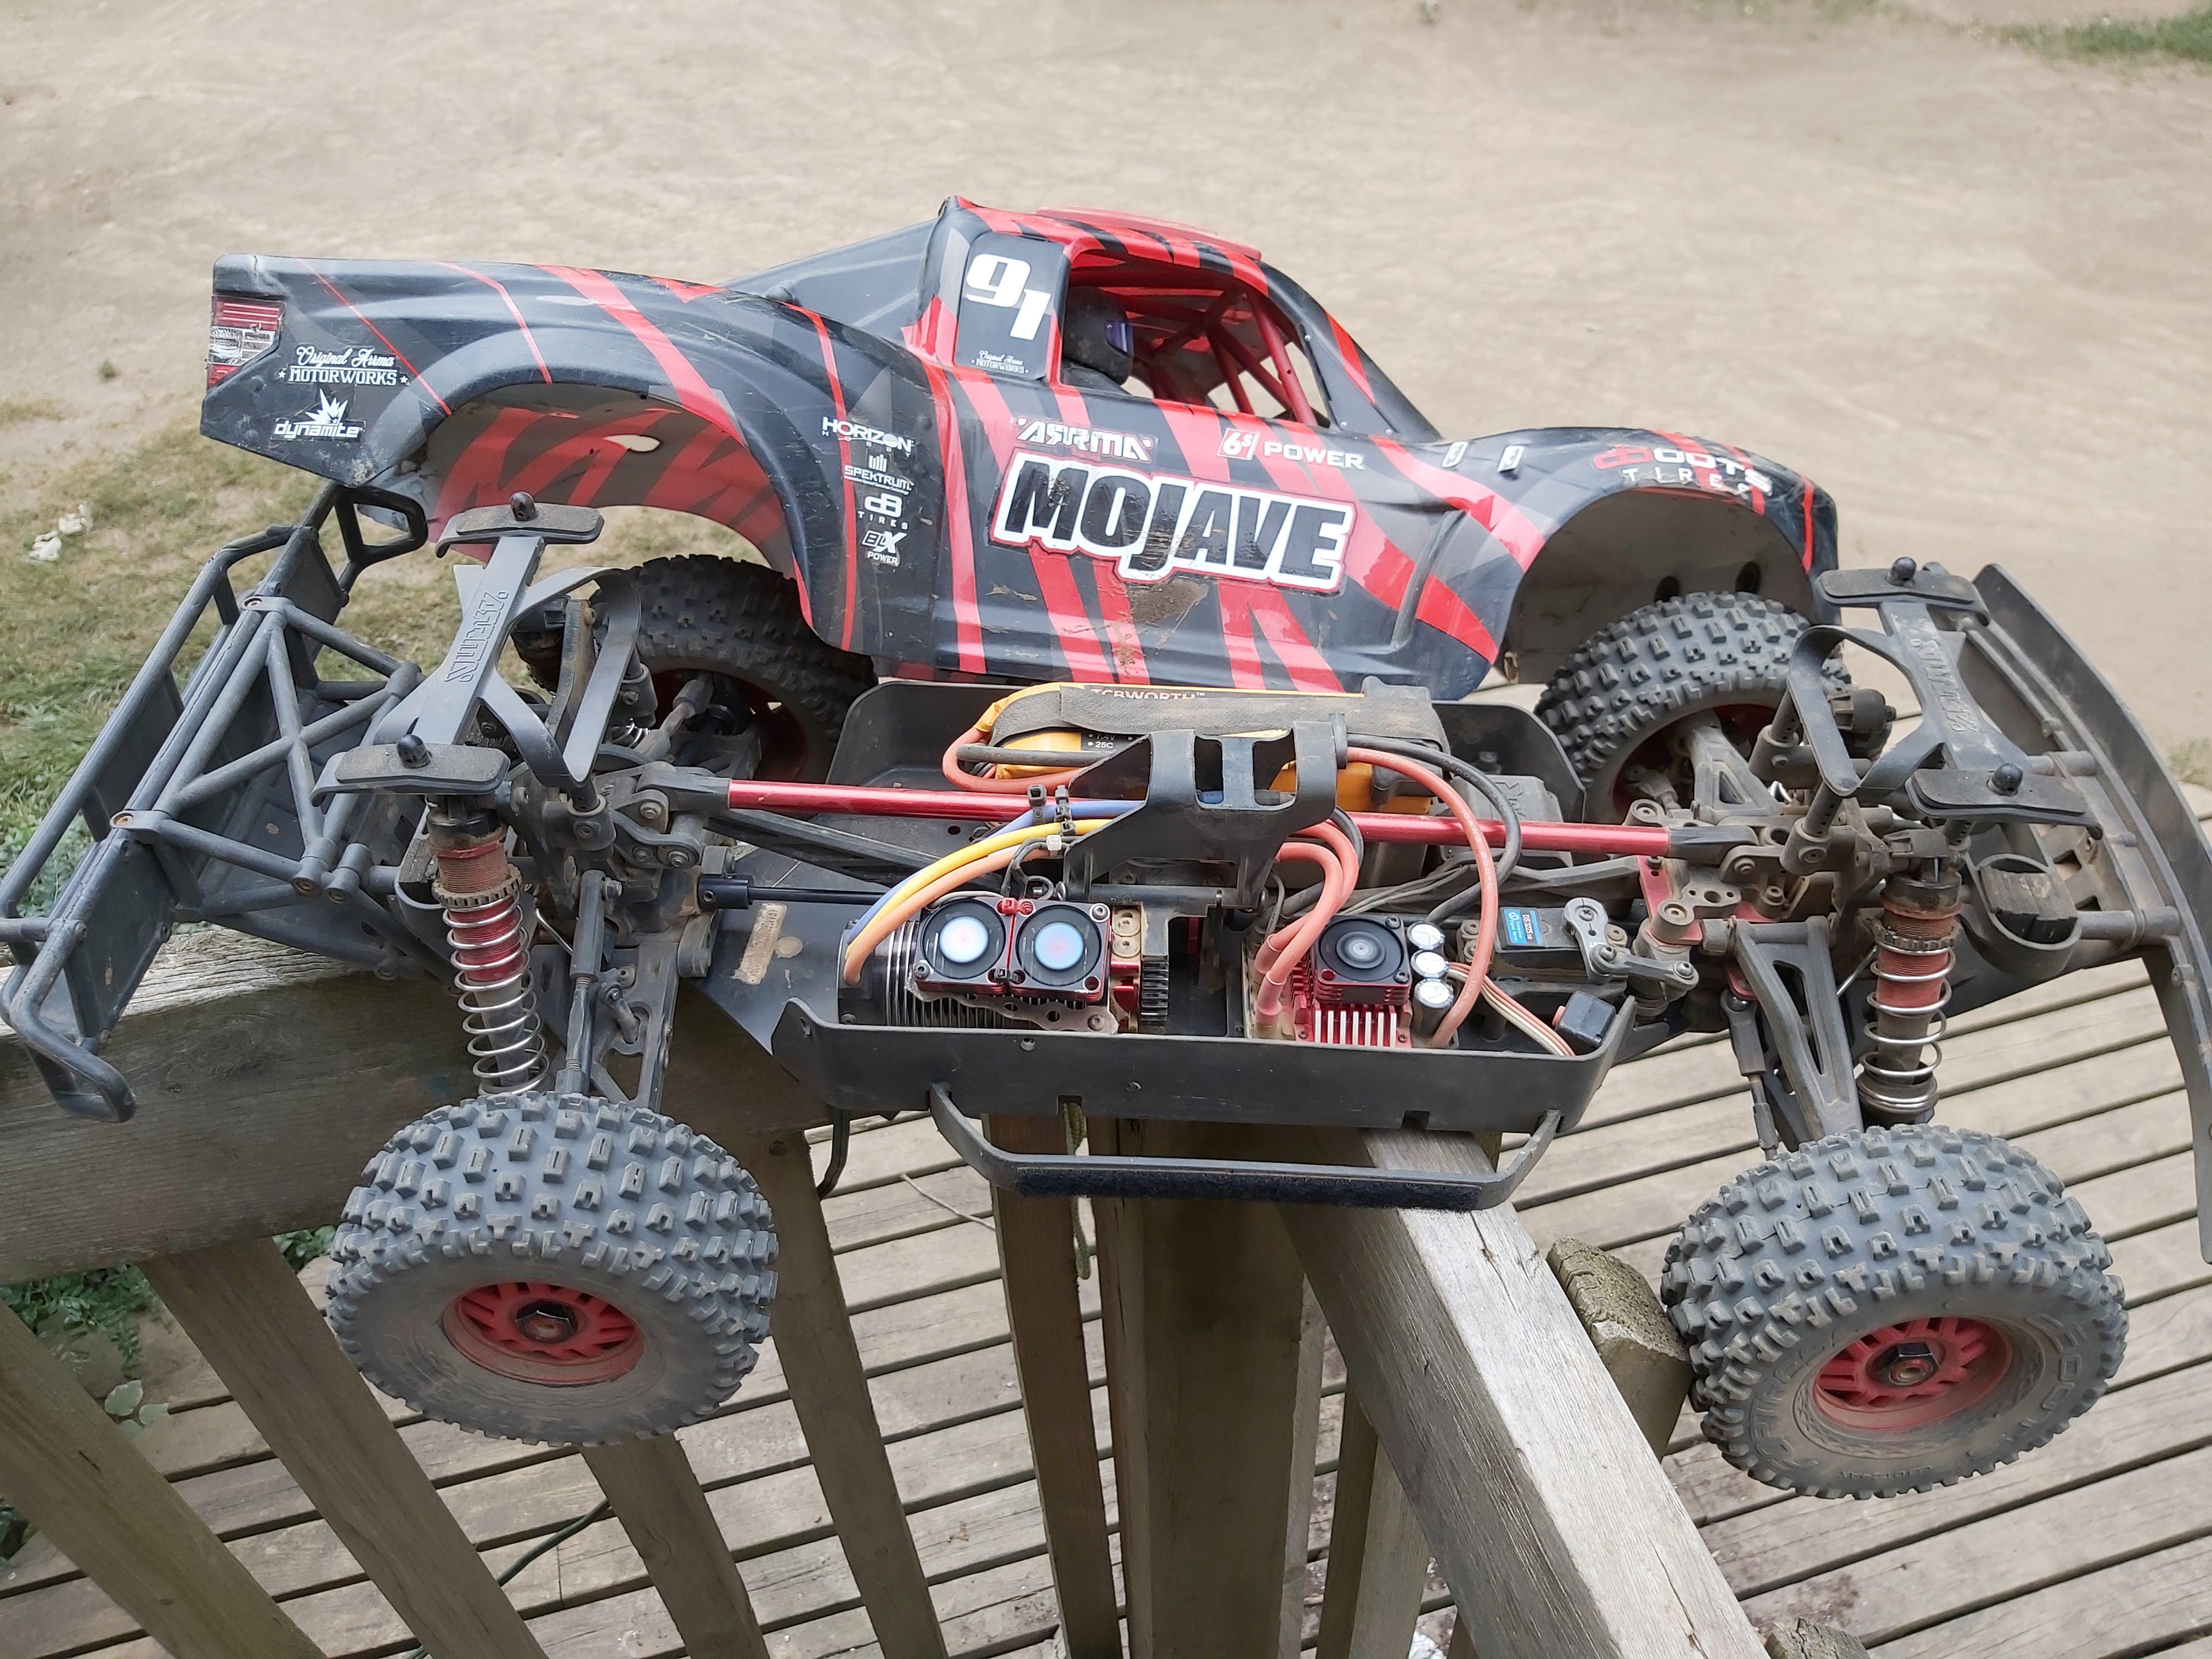 Best Rc Basher: Top Features for the Ultimate RC Basher